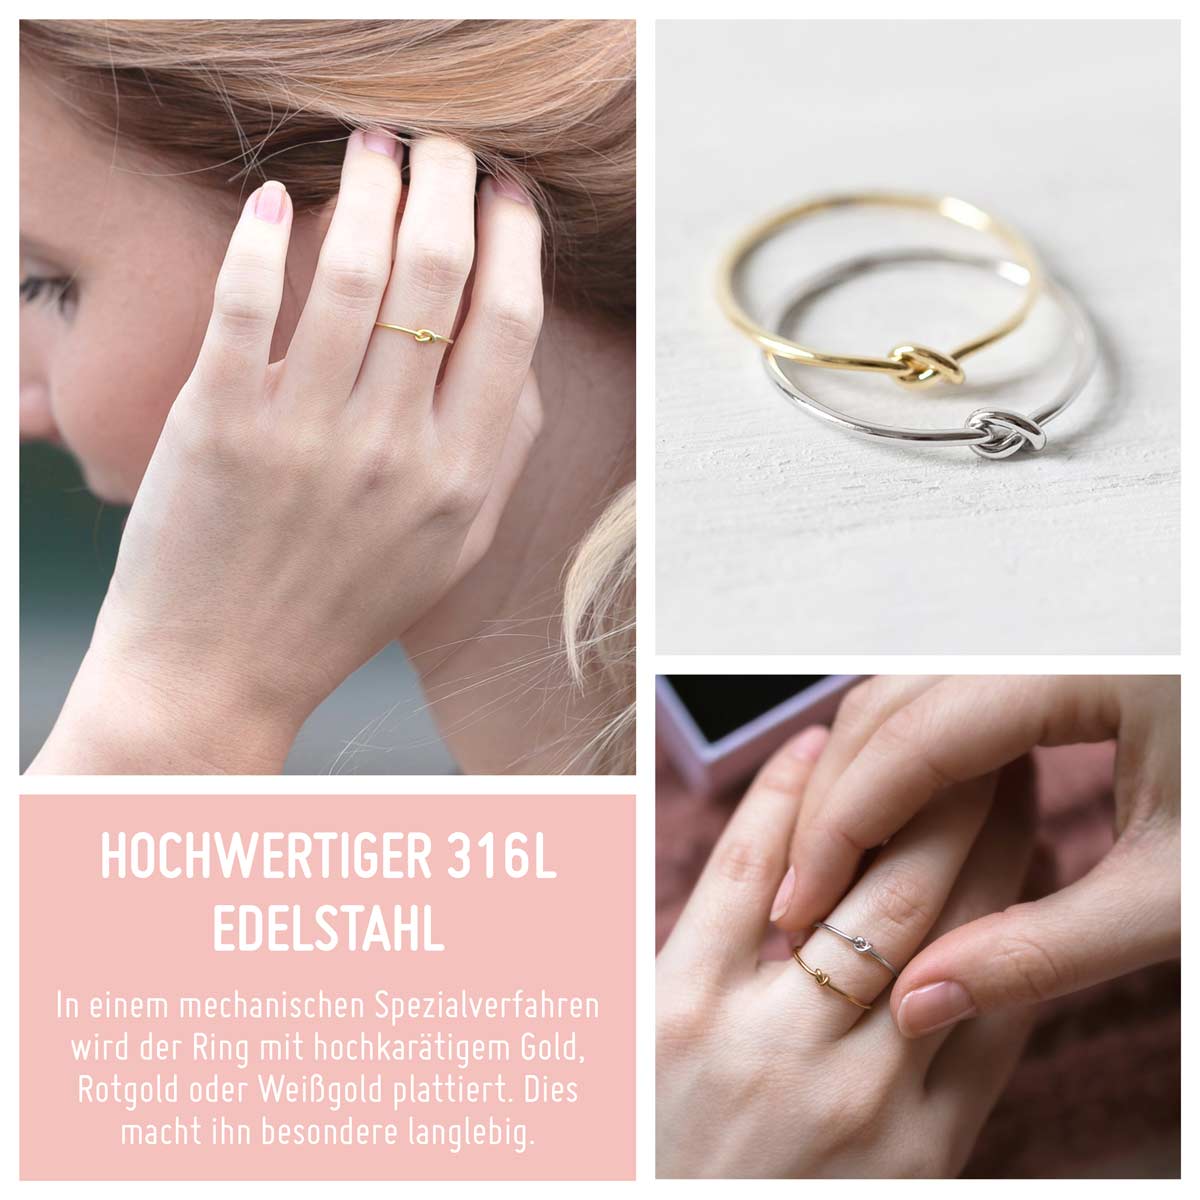 Knotenring in der Farbe Gold an Handmodel